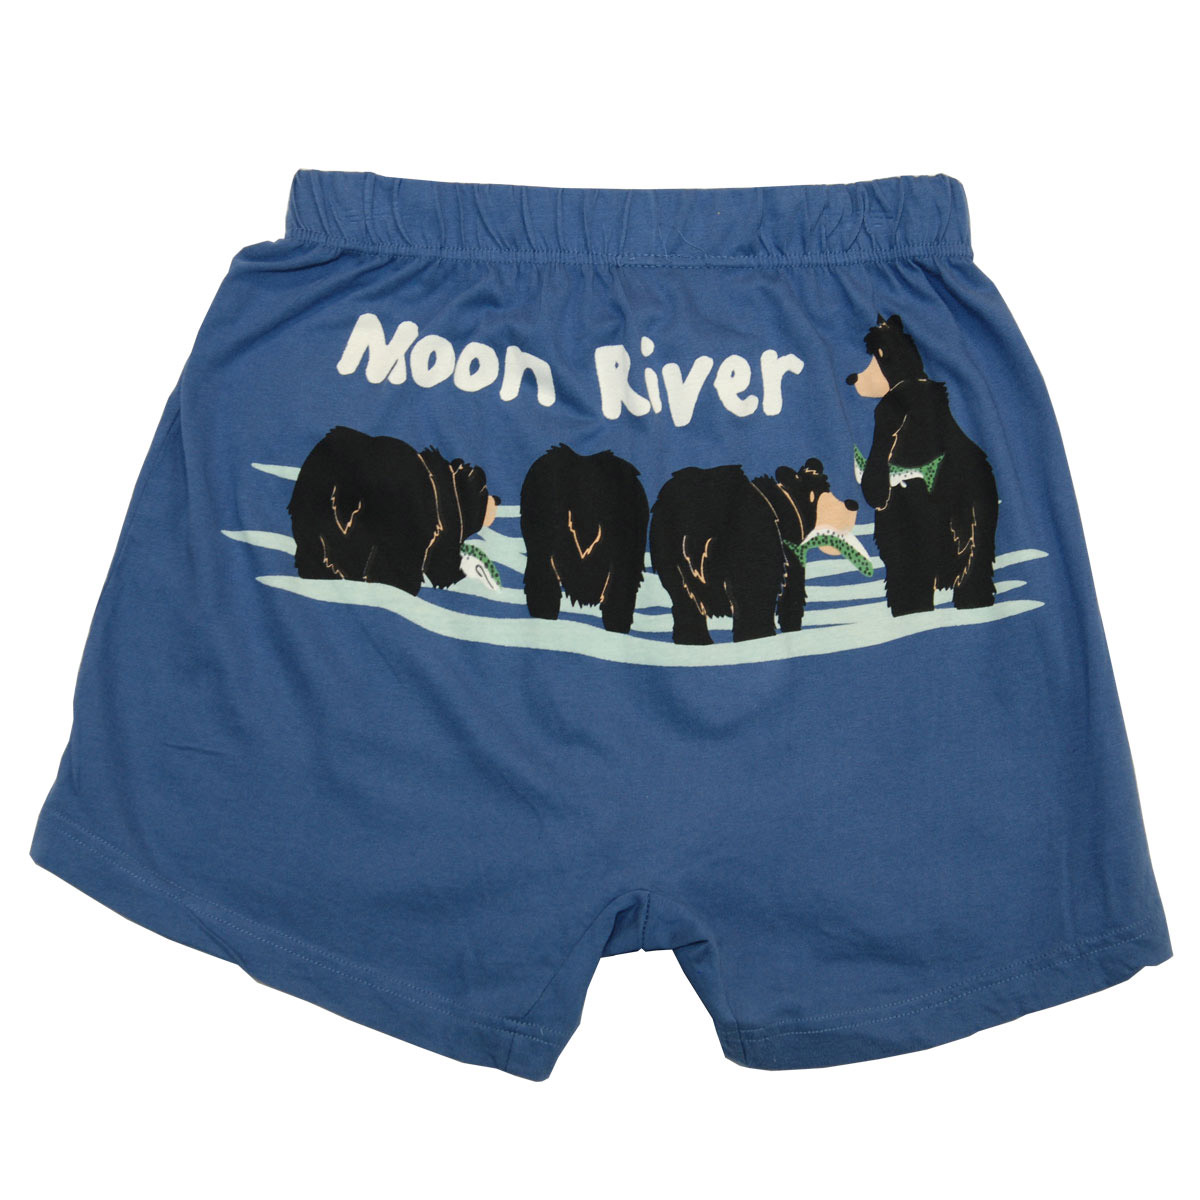 Boxers - Moon River